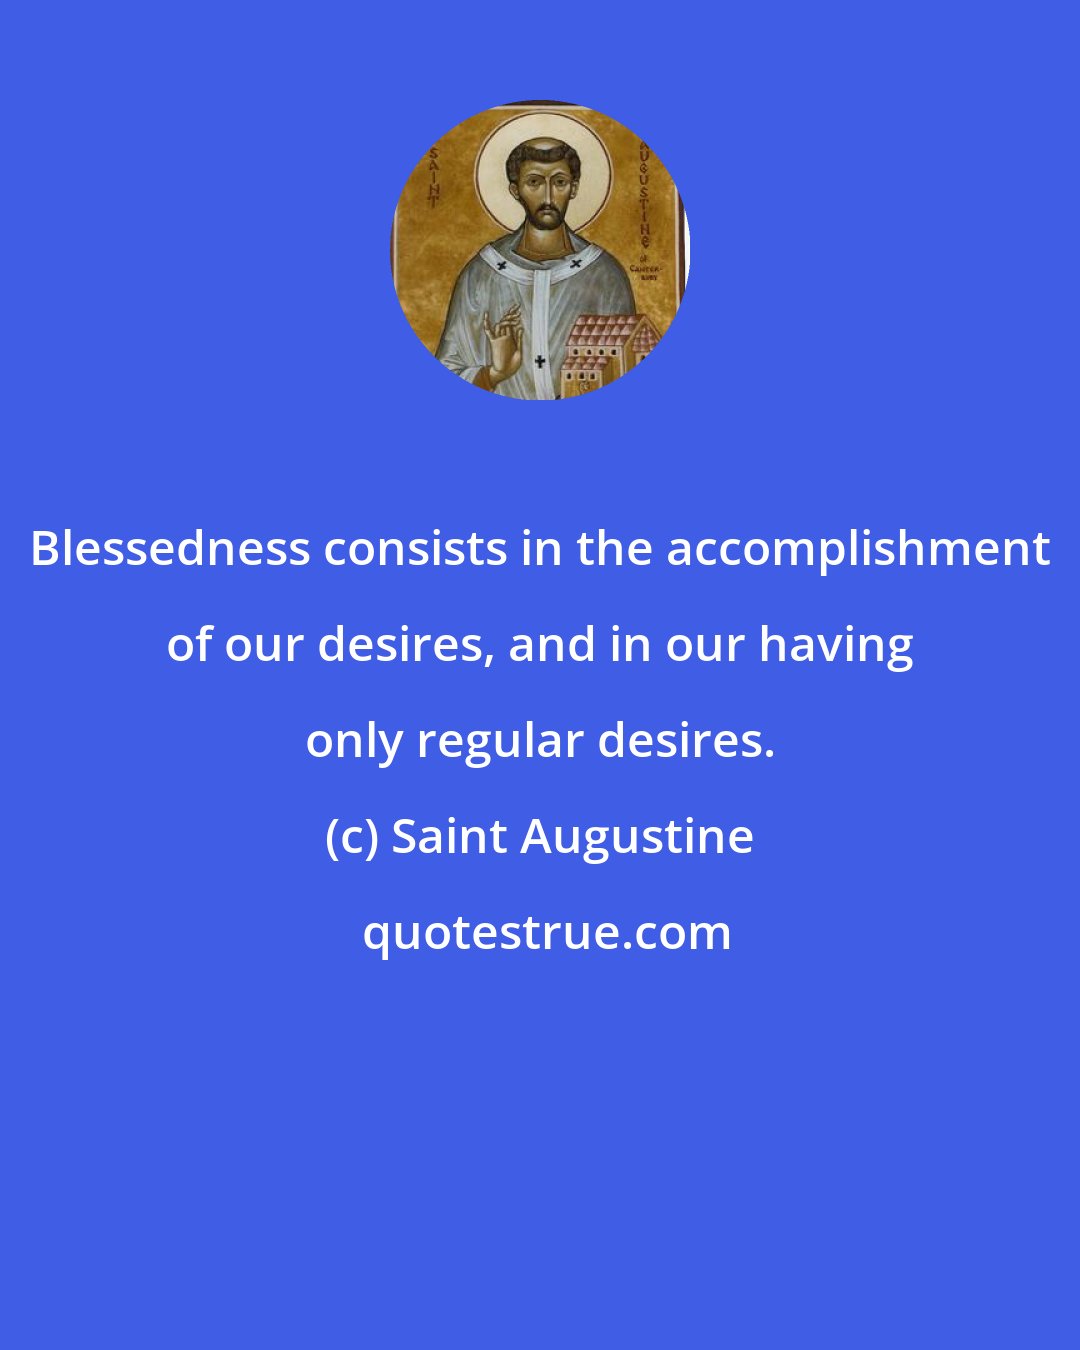 Saint Augustine: Blessedness consists in the accomplishment of our desires, and in our having only regular desires.